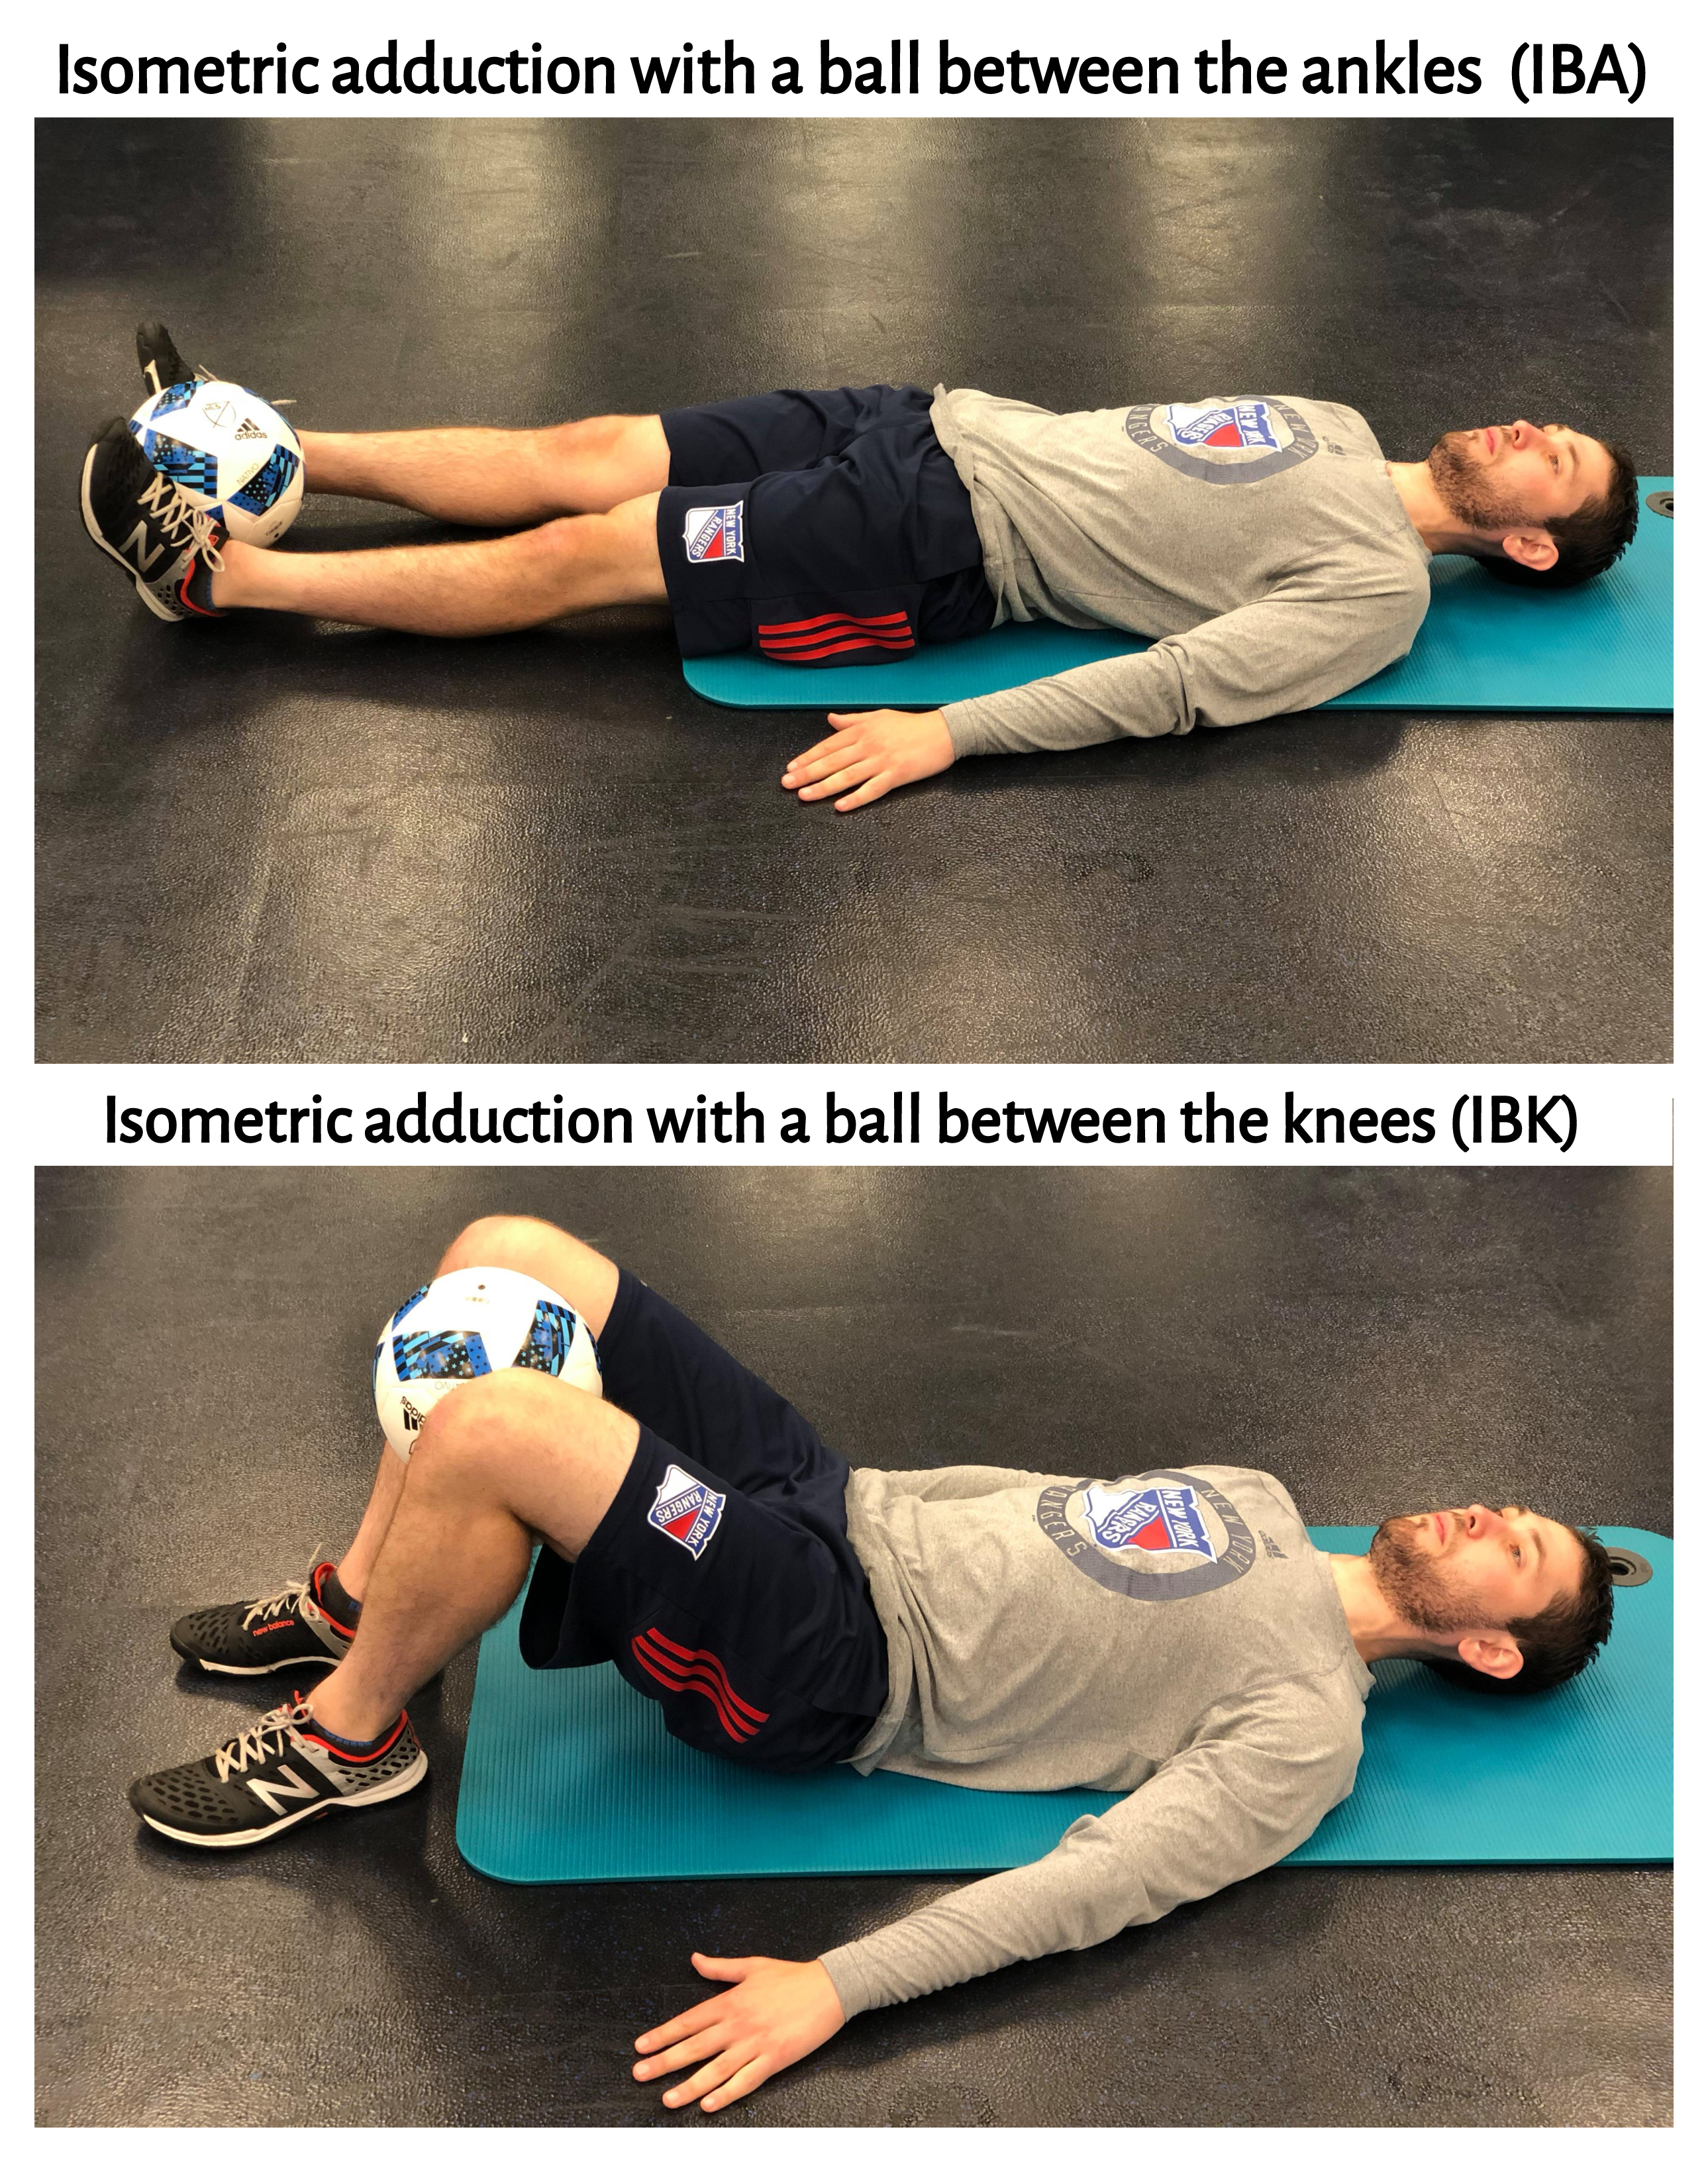 Hip-adduction-exercises-isometric-squeeze-ball-between-knees-ankles